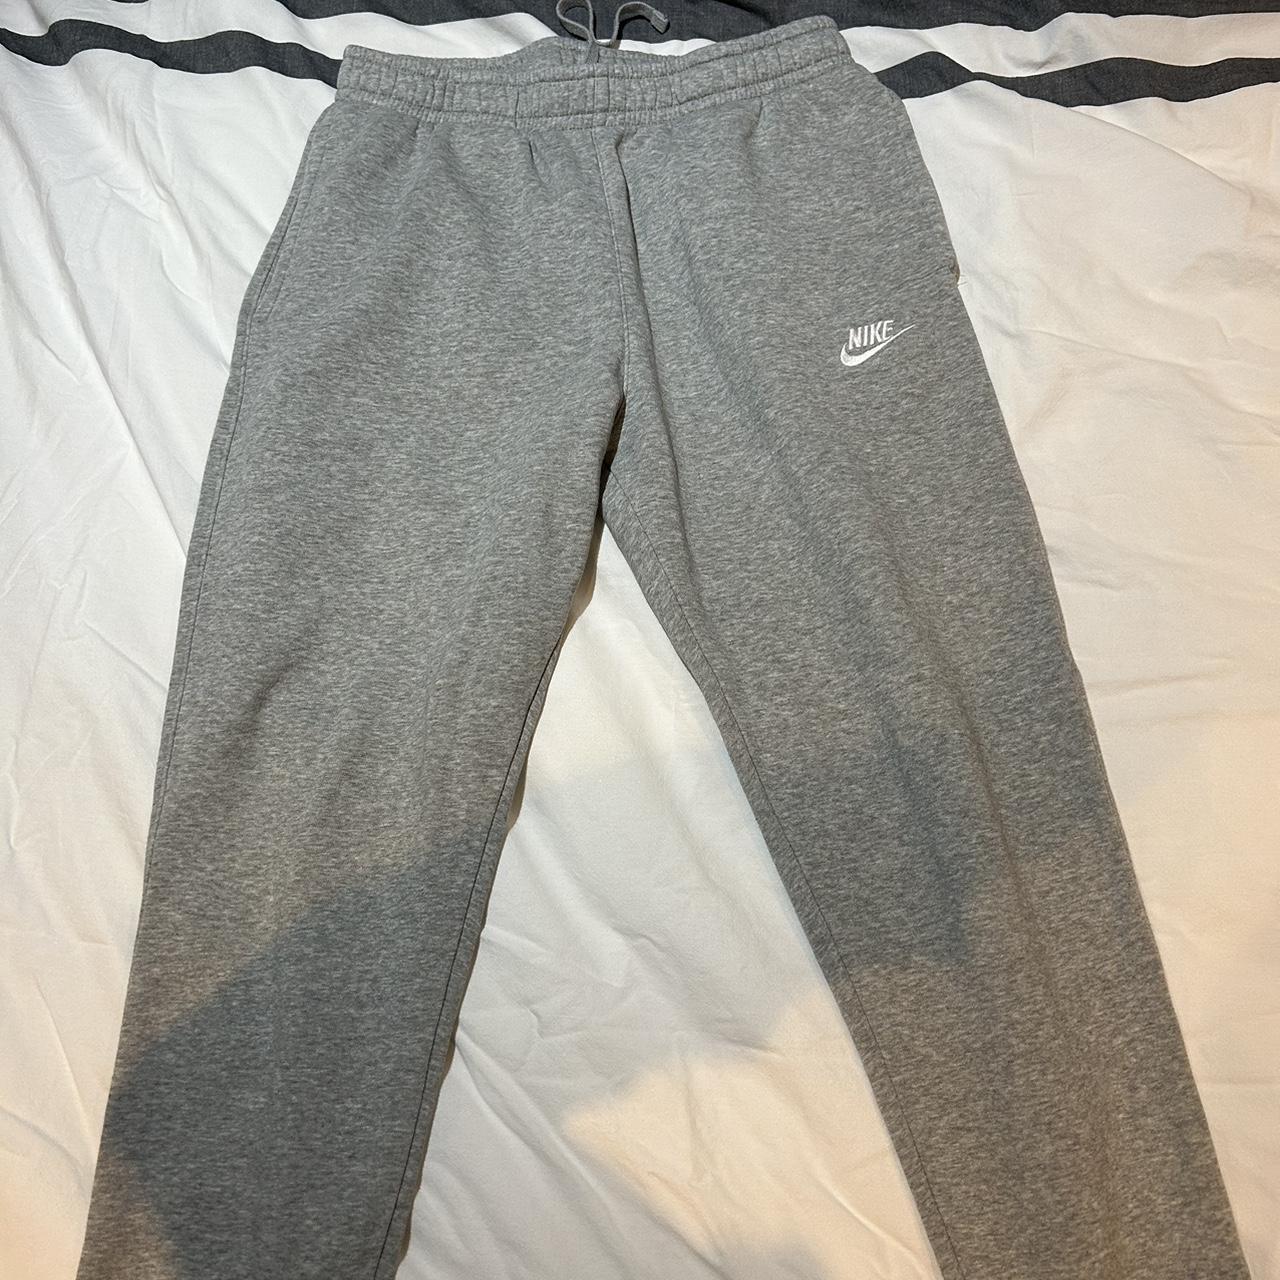 grey nike joggers perfect condition ribbed cuff... - Depop